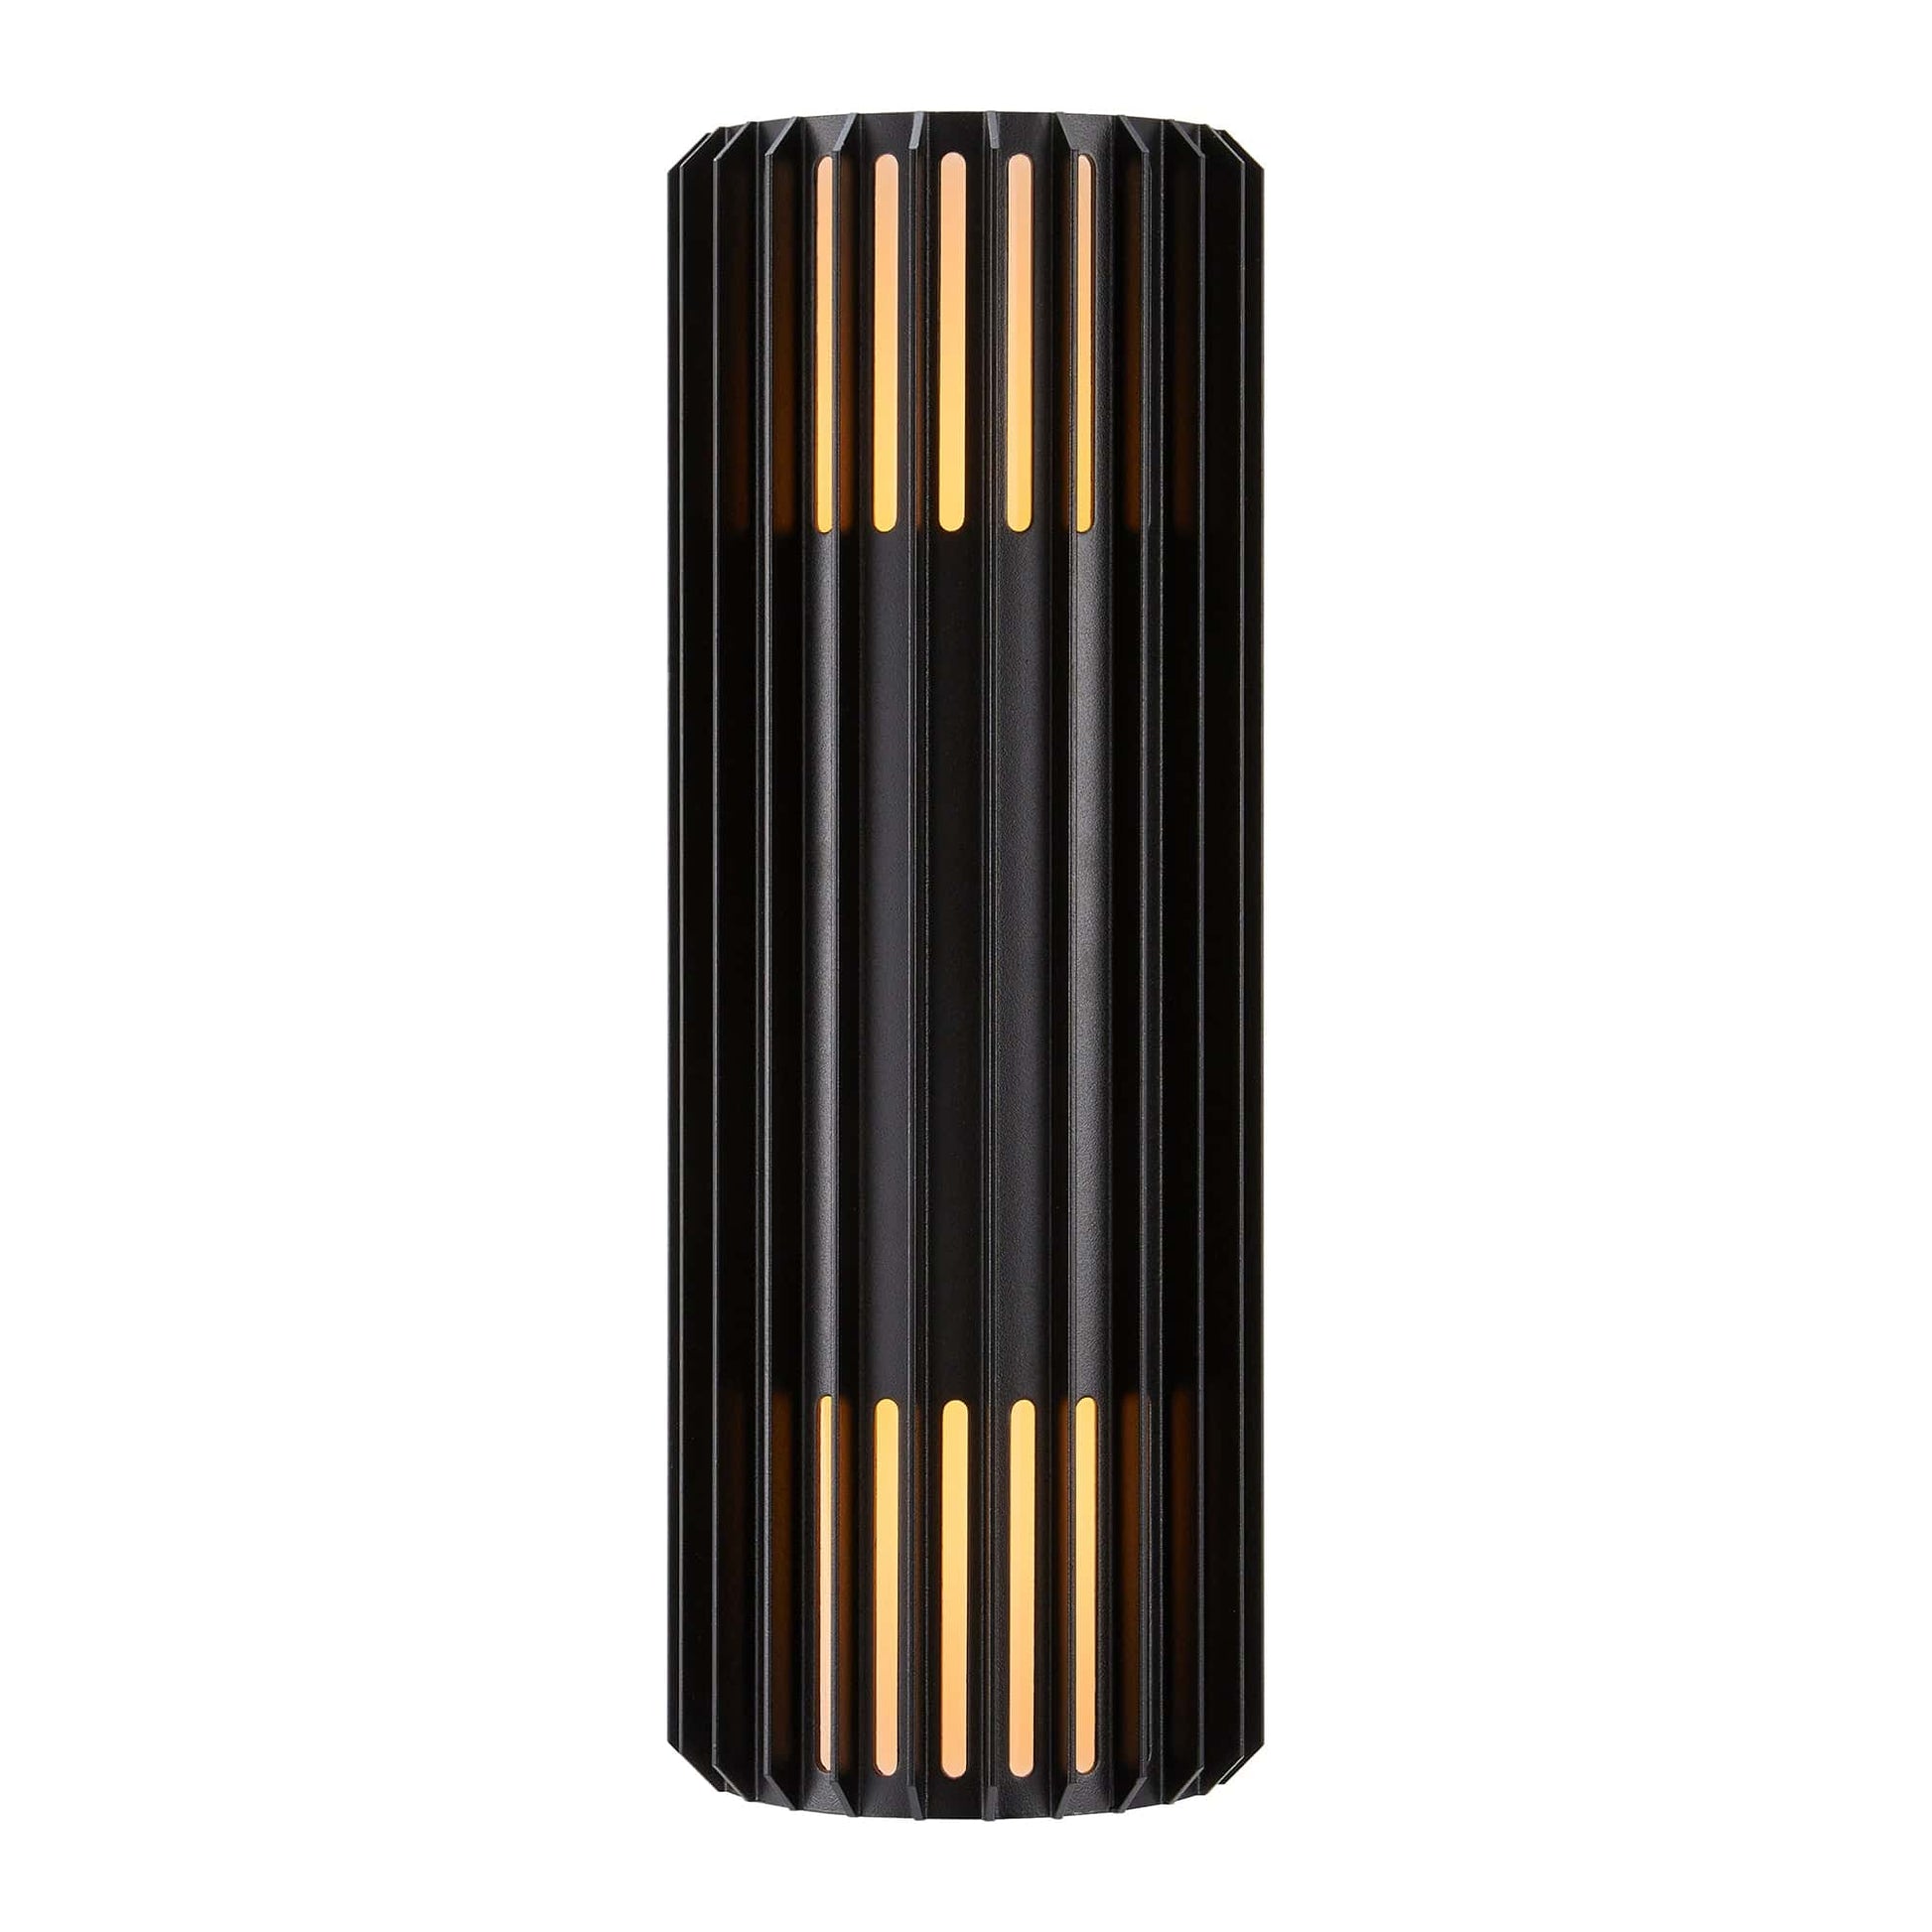 Nordlux Outdoor Lights Aludra Double Outdoor Wall Light